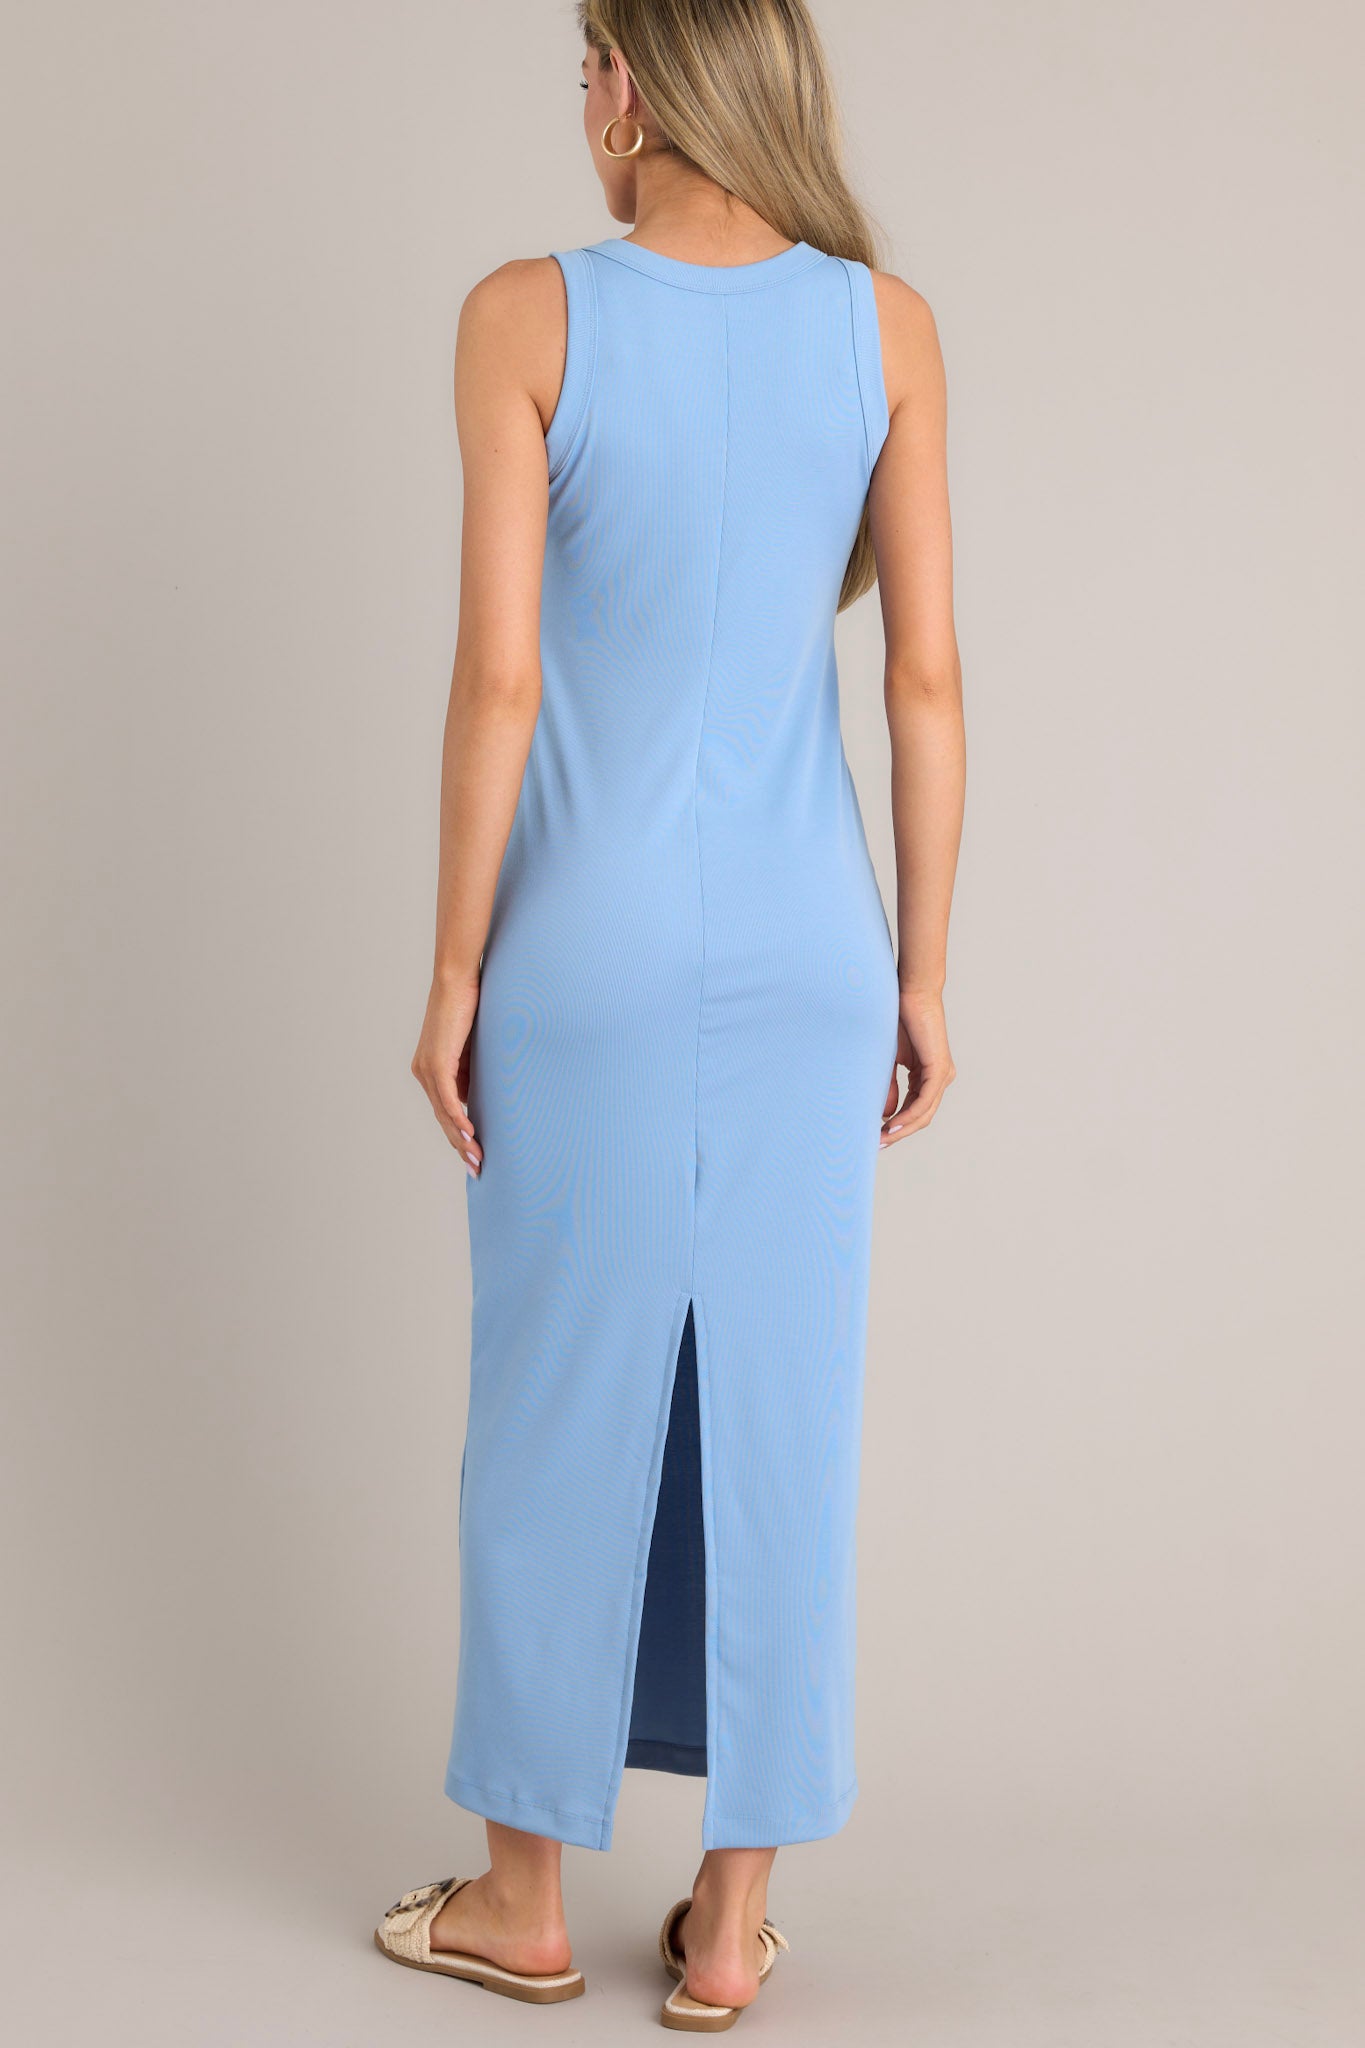 Back view of this dress that features a scoop neckline, a slit in the back and, a super soft material.